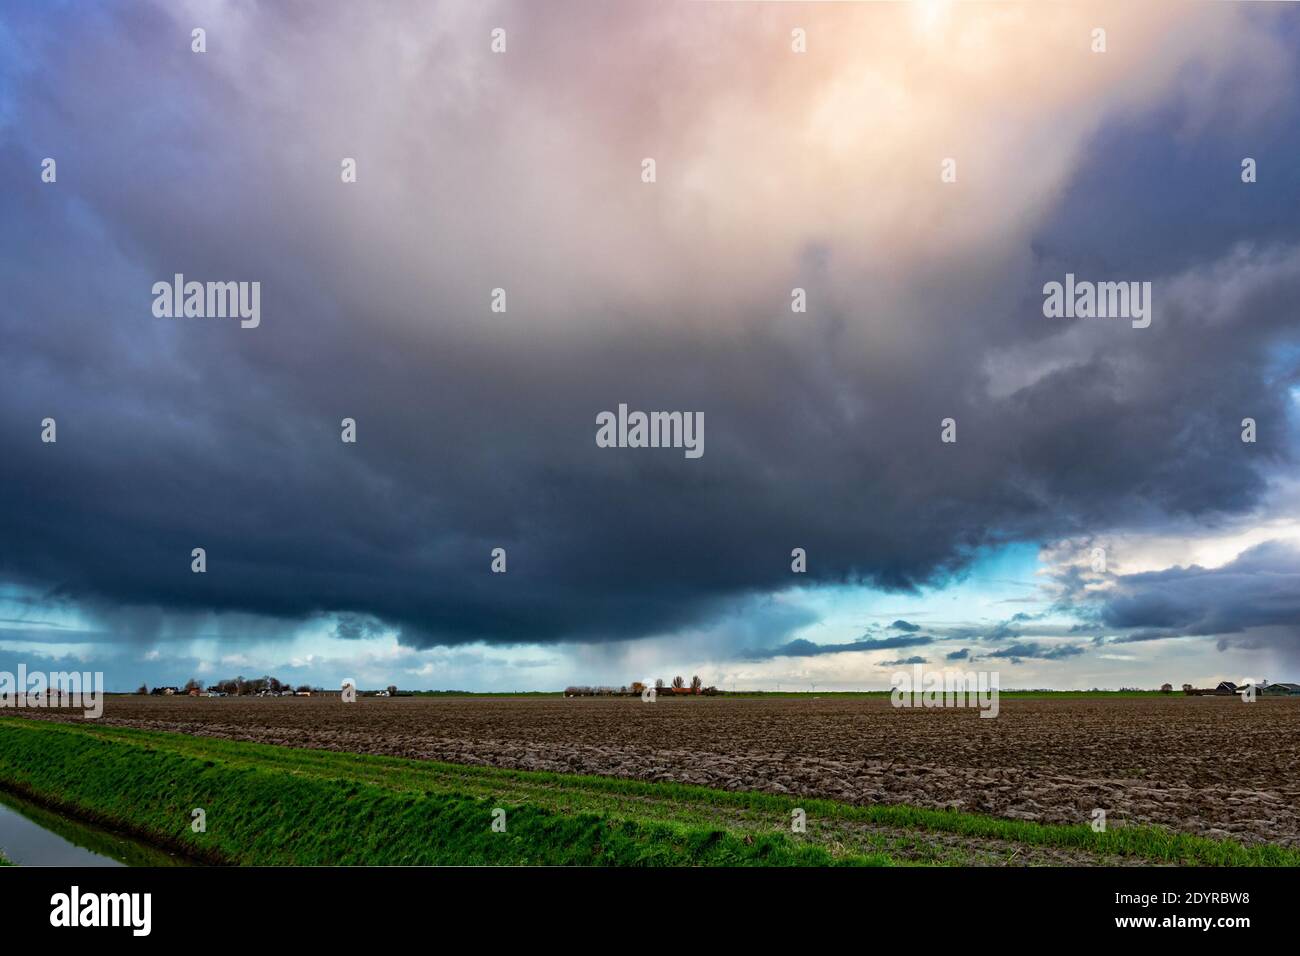 Wintry shower with fall streaks of rain and small hail over flat dutch countryside Stock Photo